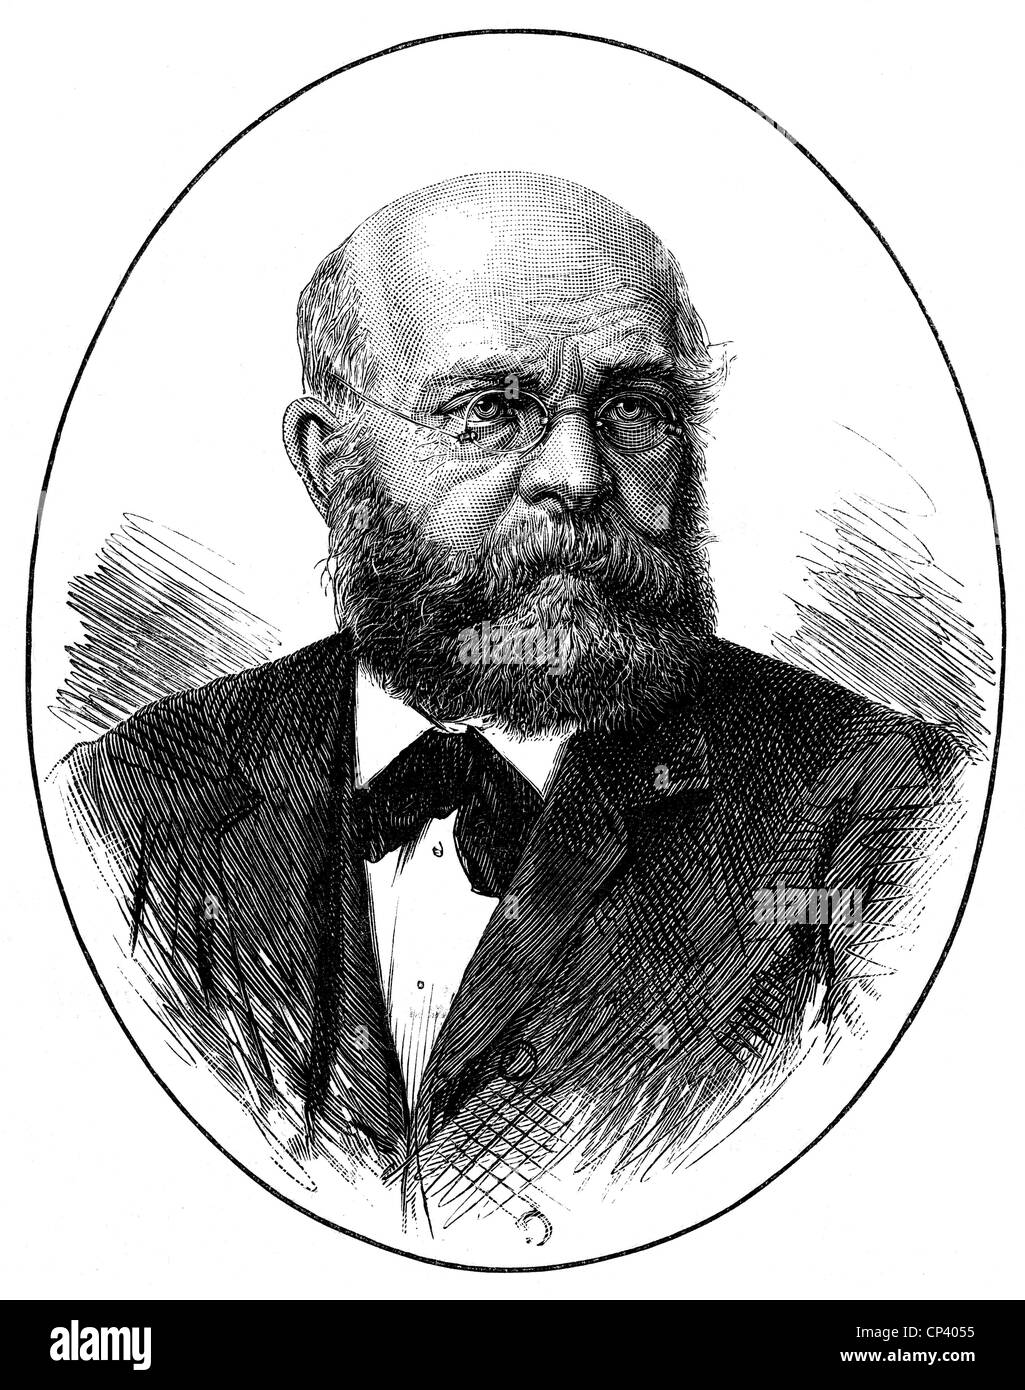 Burger, Ludwig, 19.9.1825 - 22.10.1884, German painter, portrait, wood engraving, after photo by H. Graf, published in 1884, Stock Photo